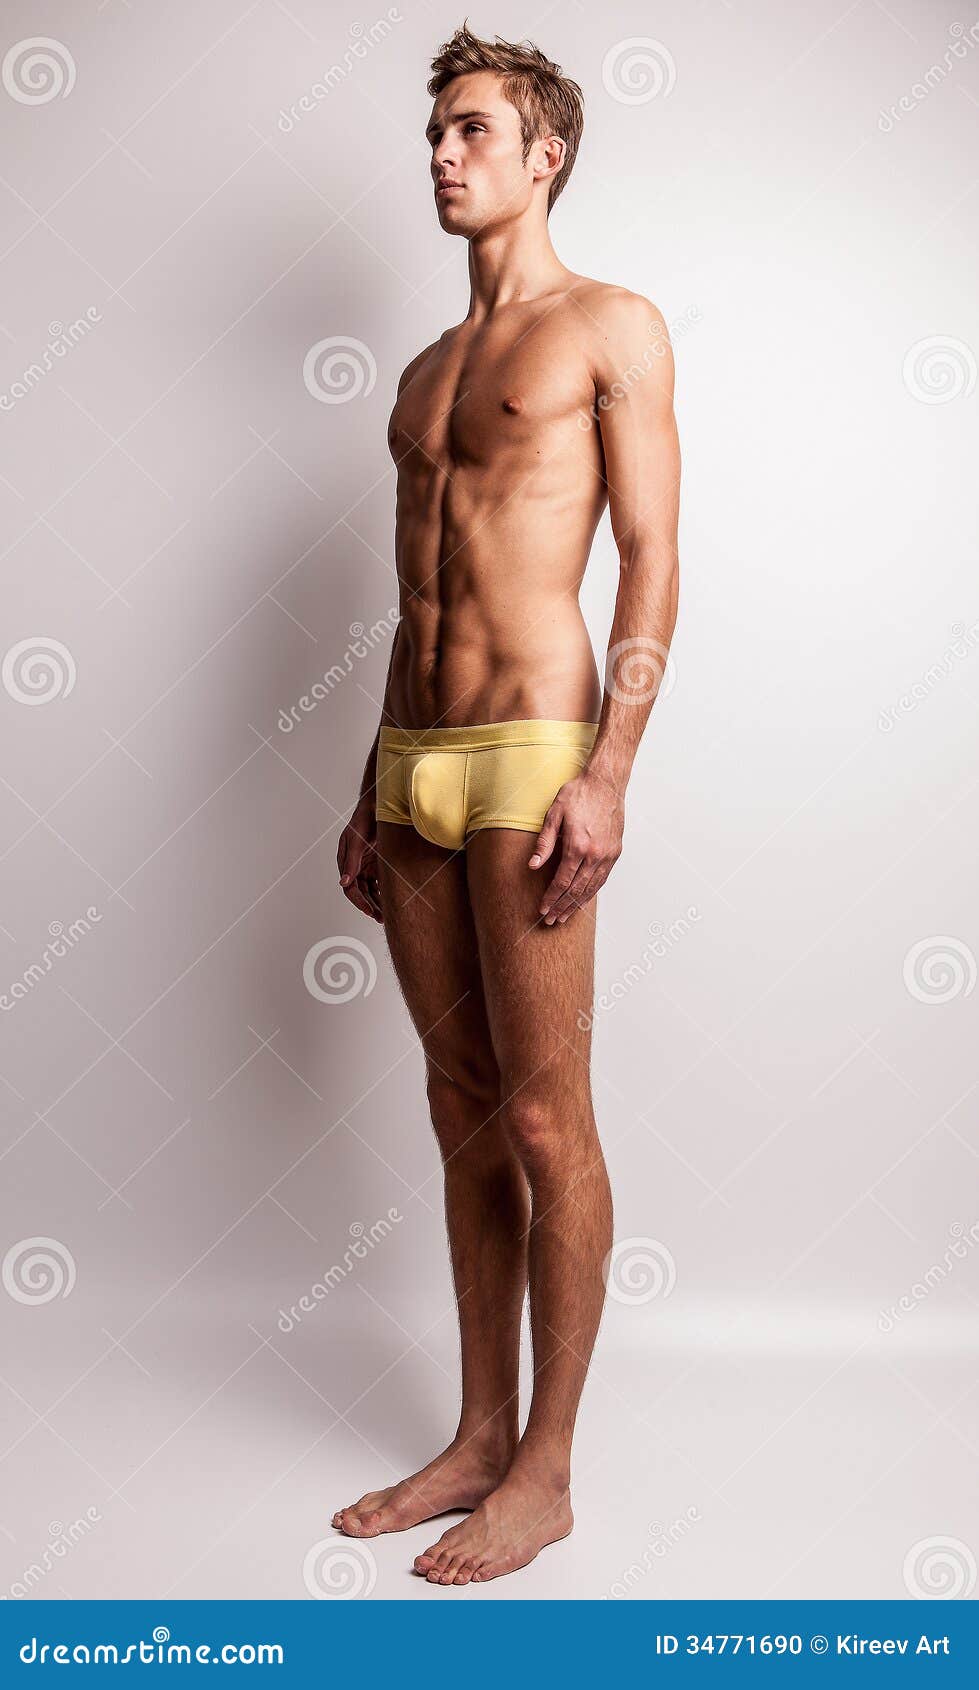 Attractive Young Undressed Man Model image